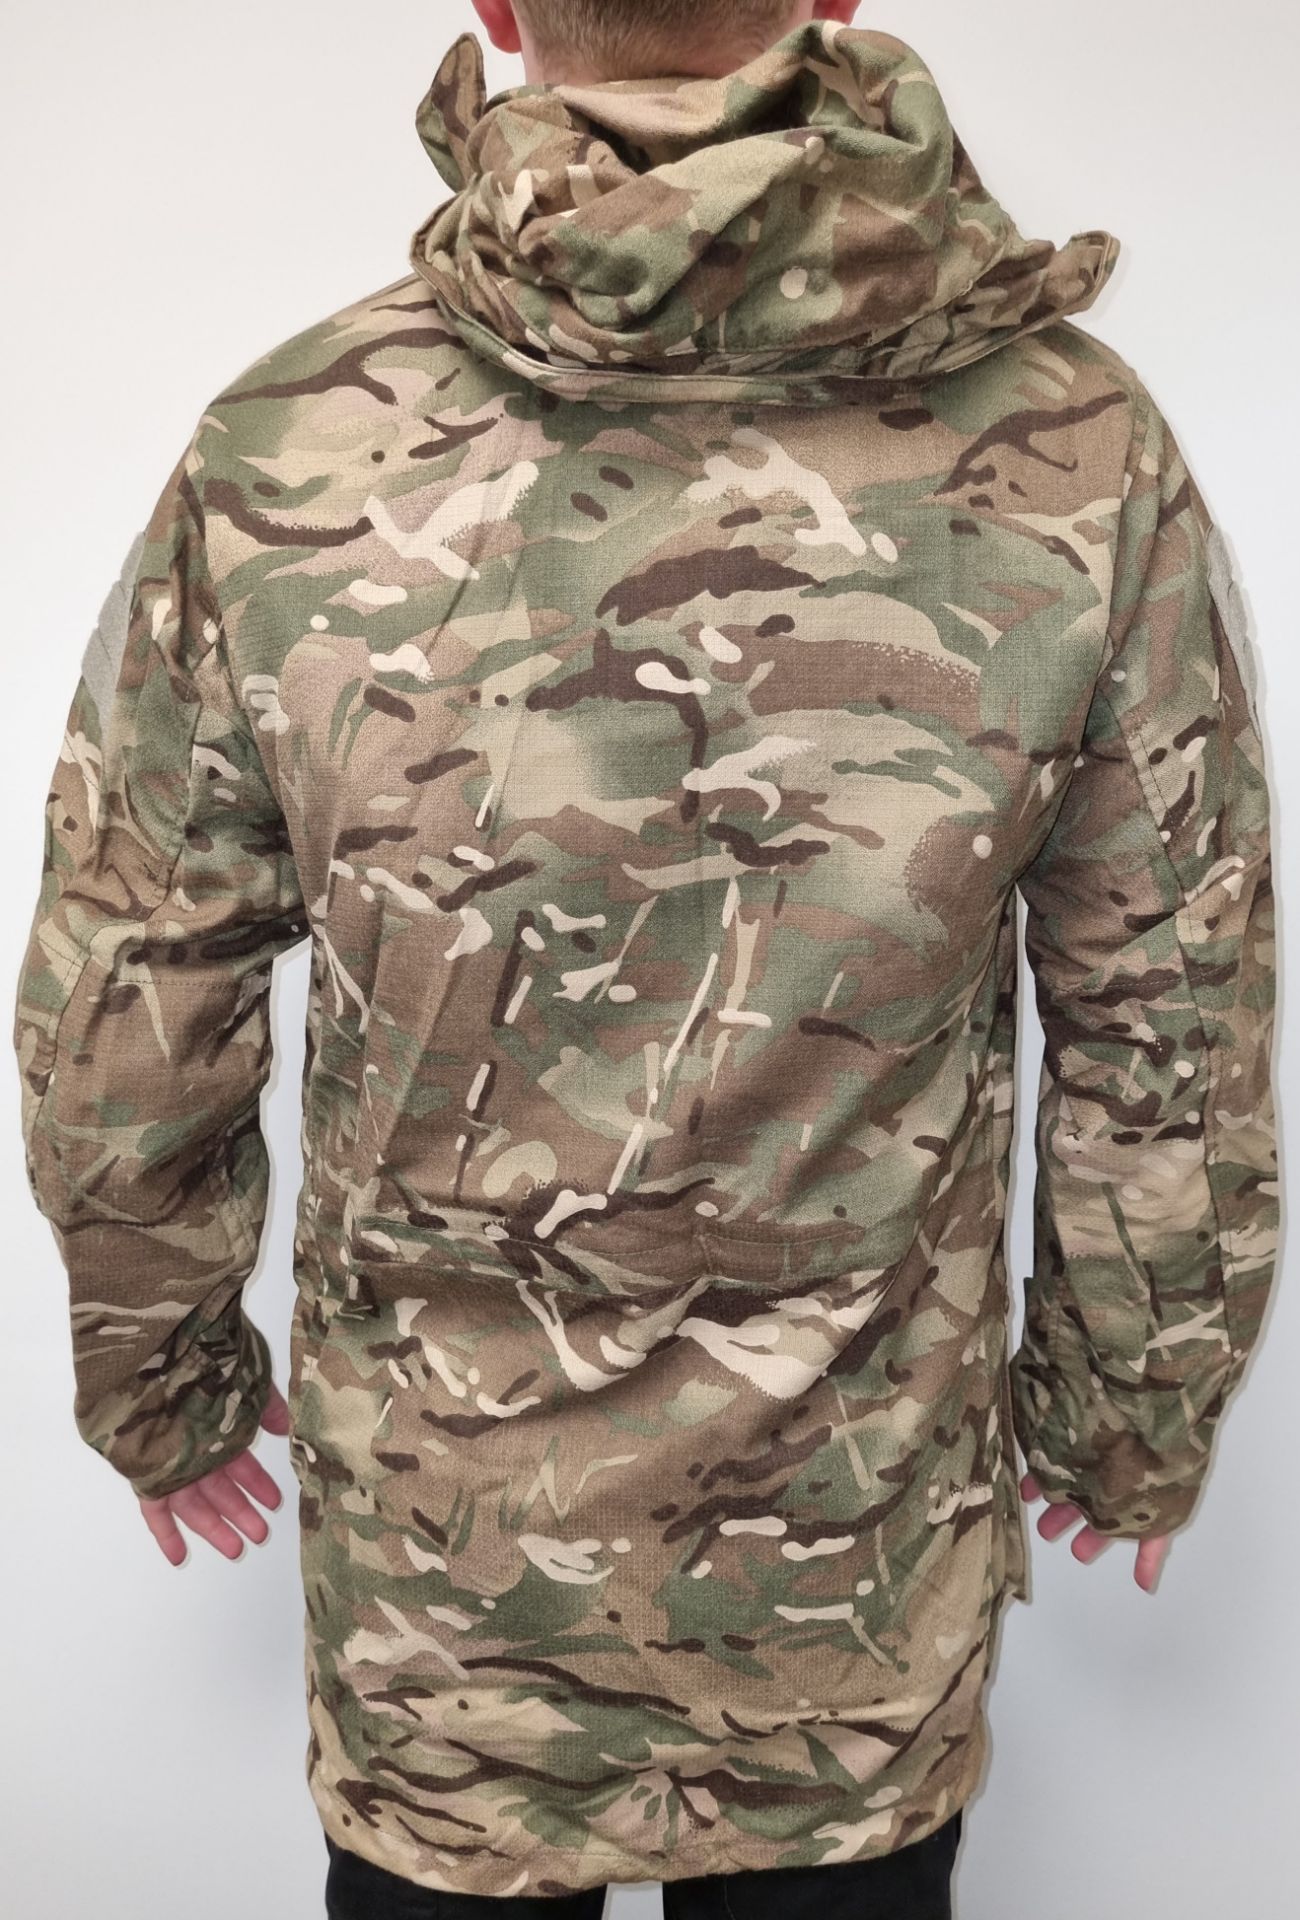 25x British Army MTP windproof smocks - mixed grades and sizes - Image 3 of 9